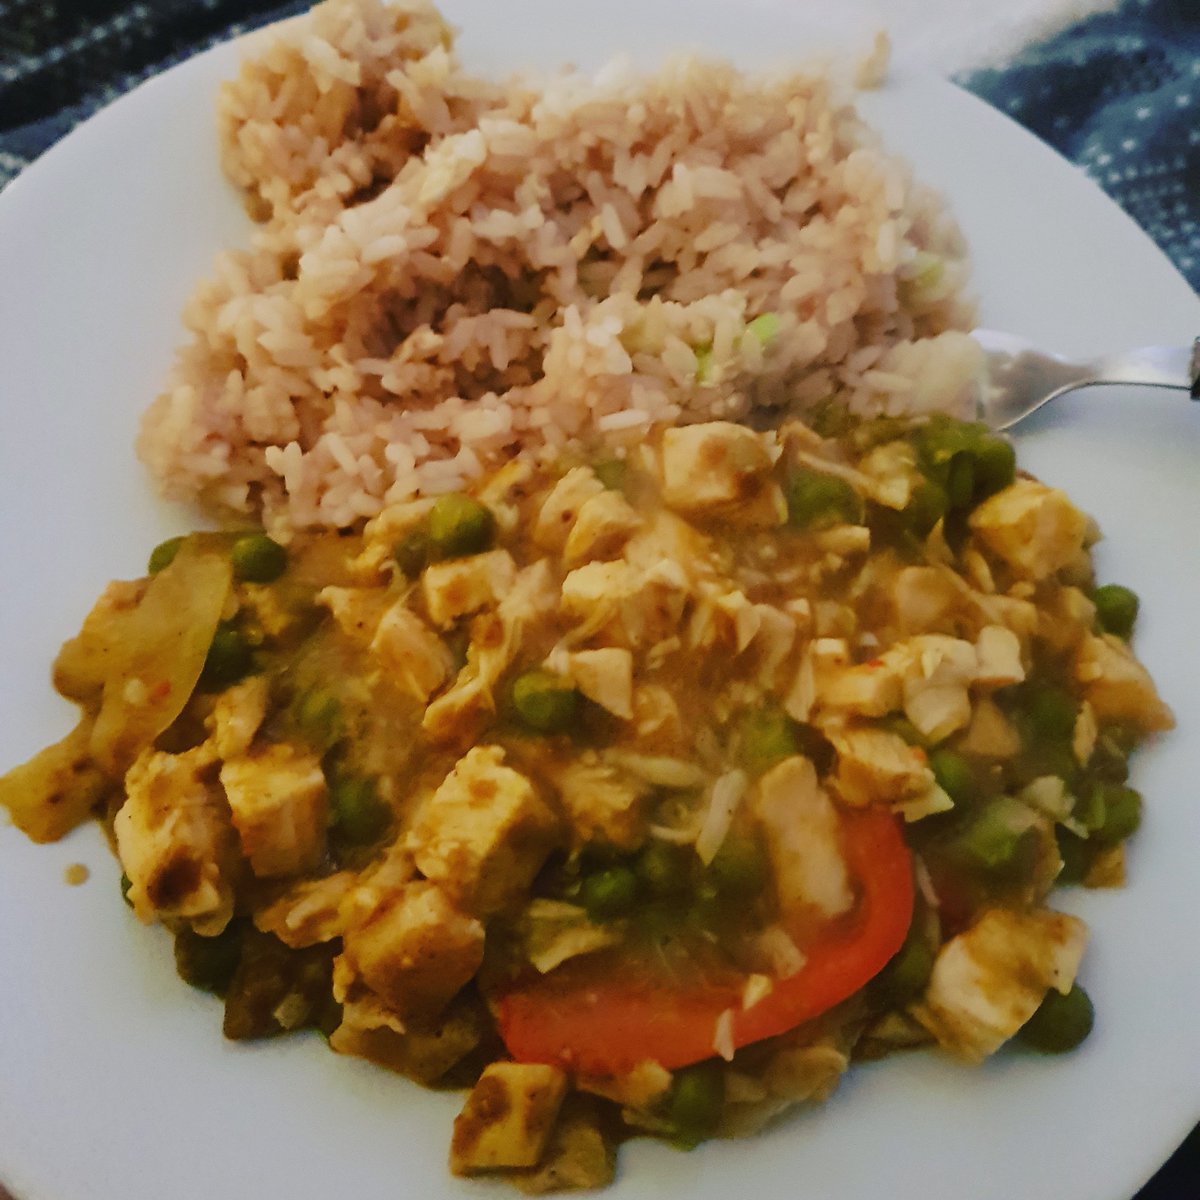 Chicken mayflower curry loads veg with egg and soya fried rice 

#swuk #slimmingworld #slimmingworldboy #slimmingworldjourney #slimmingworlduk